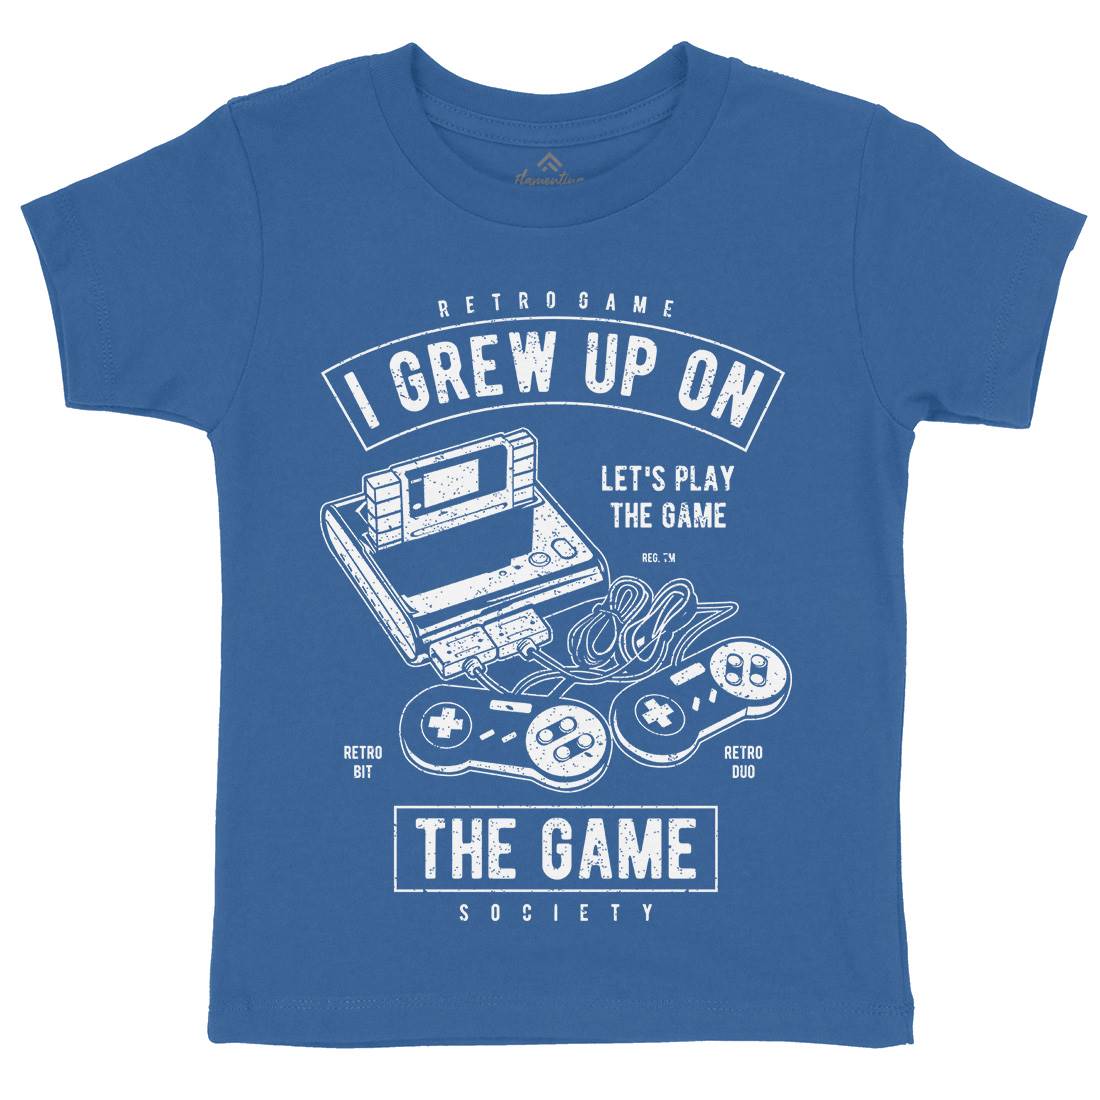 Grew Up On The Game Kids Crew Neck T-Shirt Geek A679